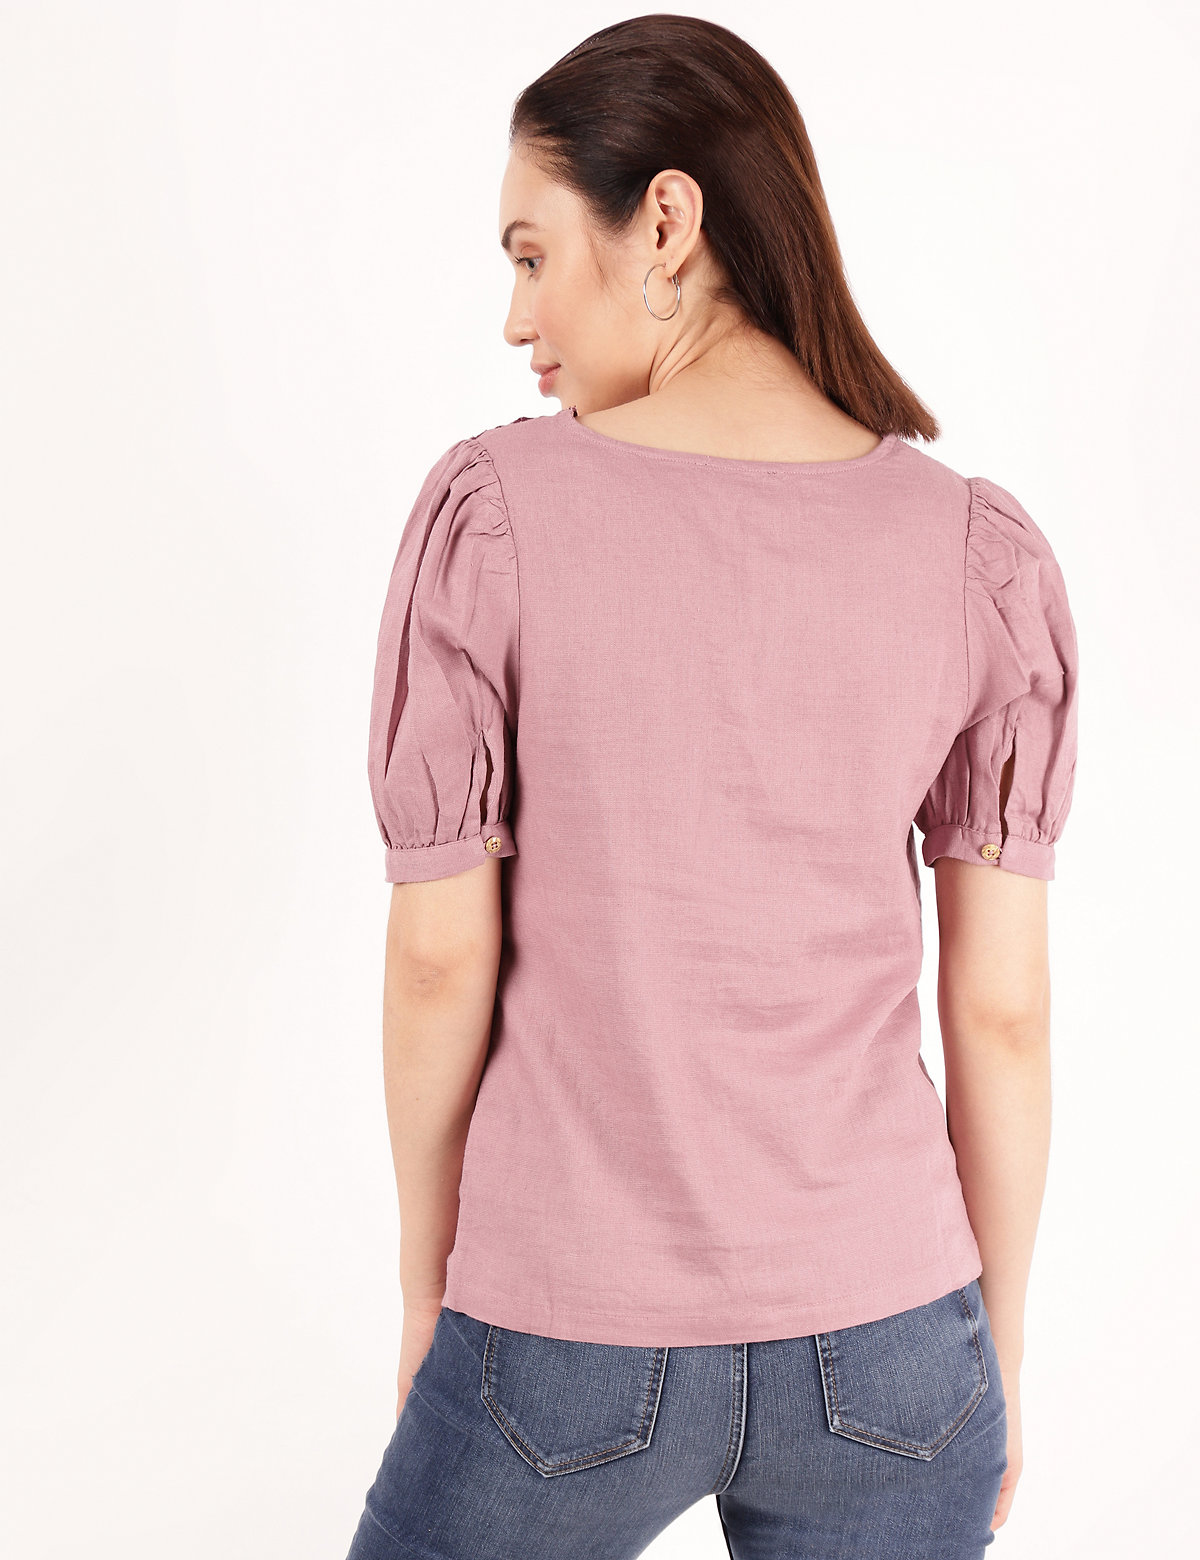 Flax Linen Mix Embroidered V-Neck Top